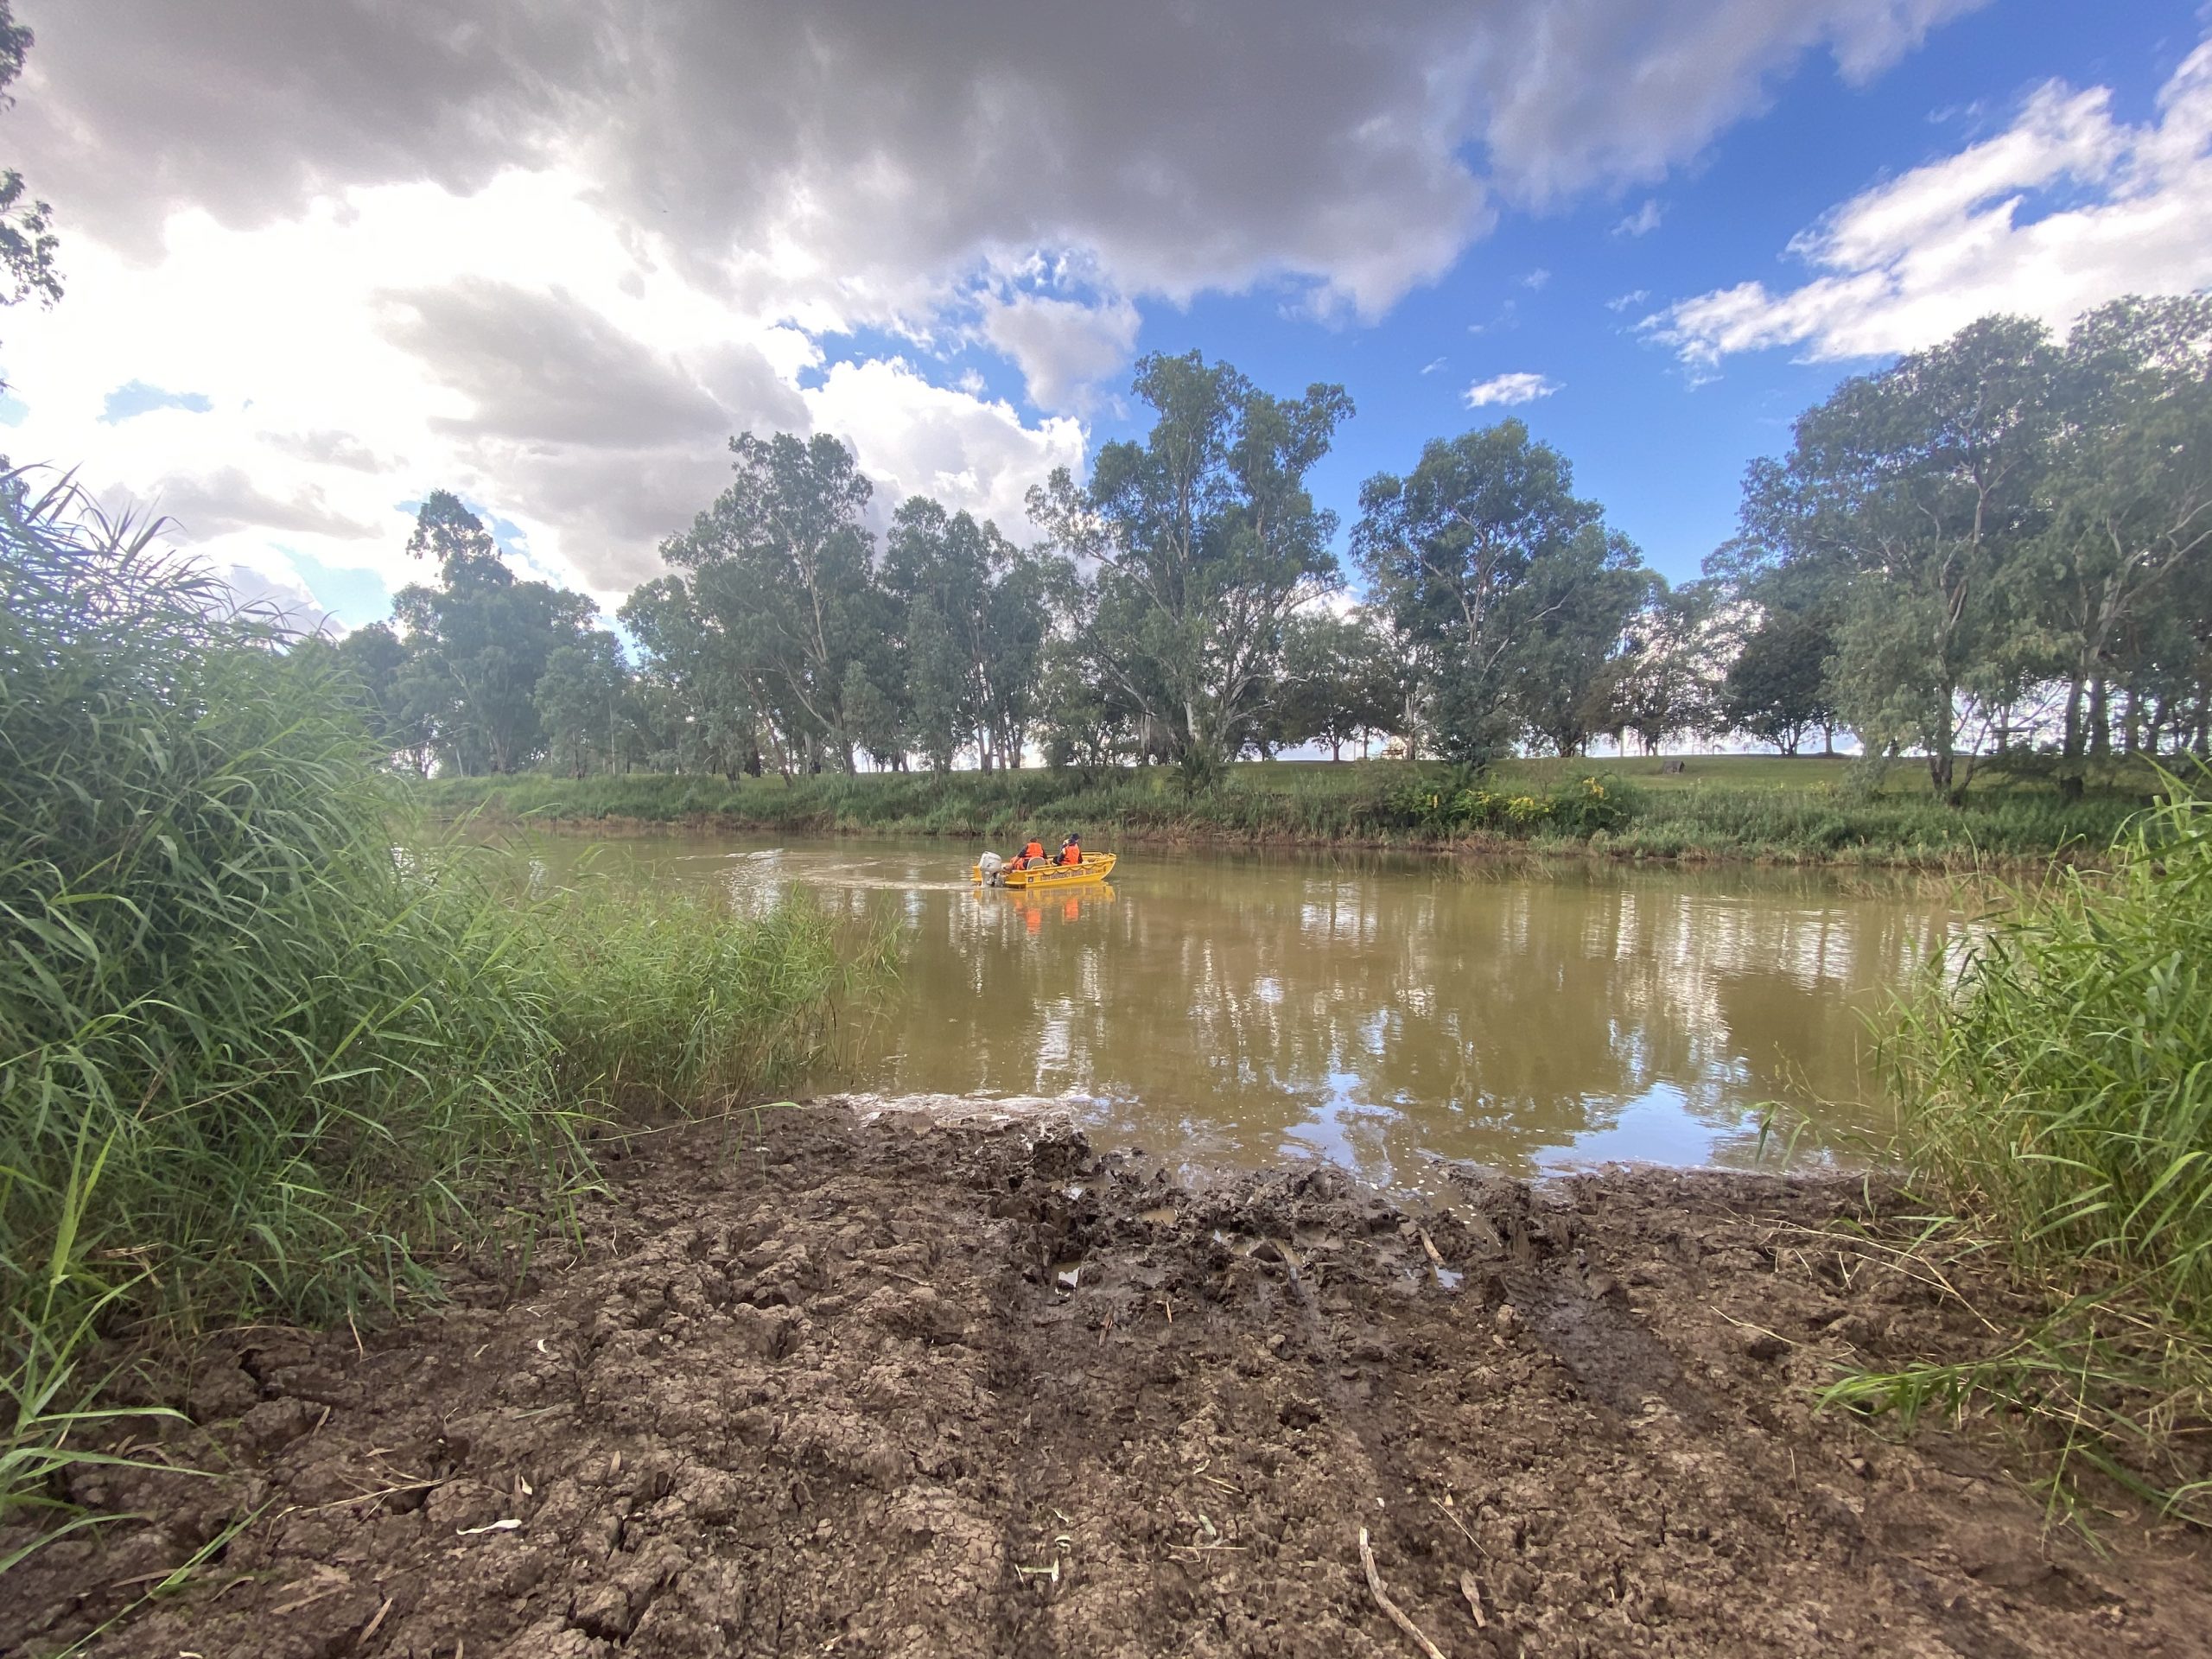 Crews investigating ‘discolouring’ of water in the Narrabri Creek